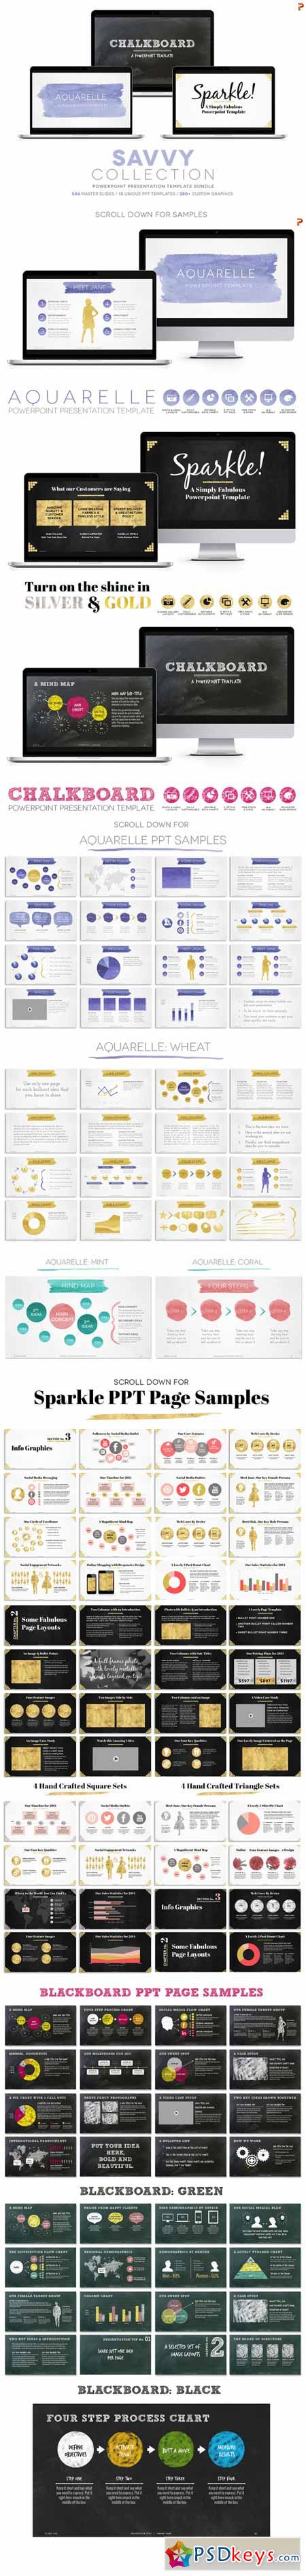 Savvy Collection PPT Template Bundle 276719